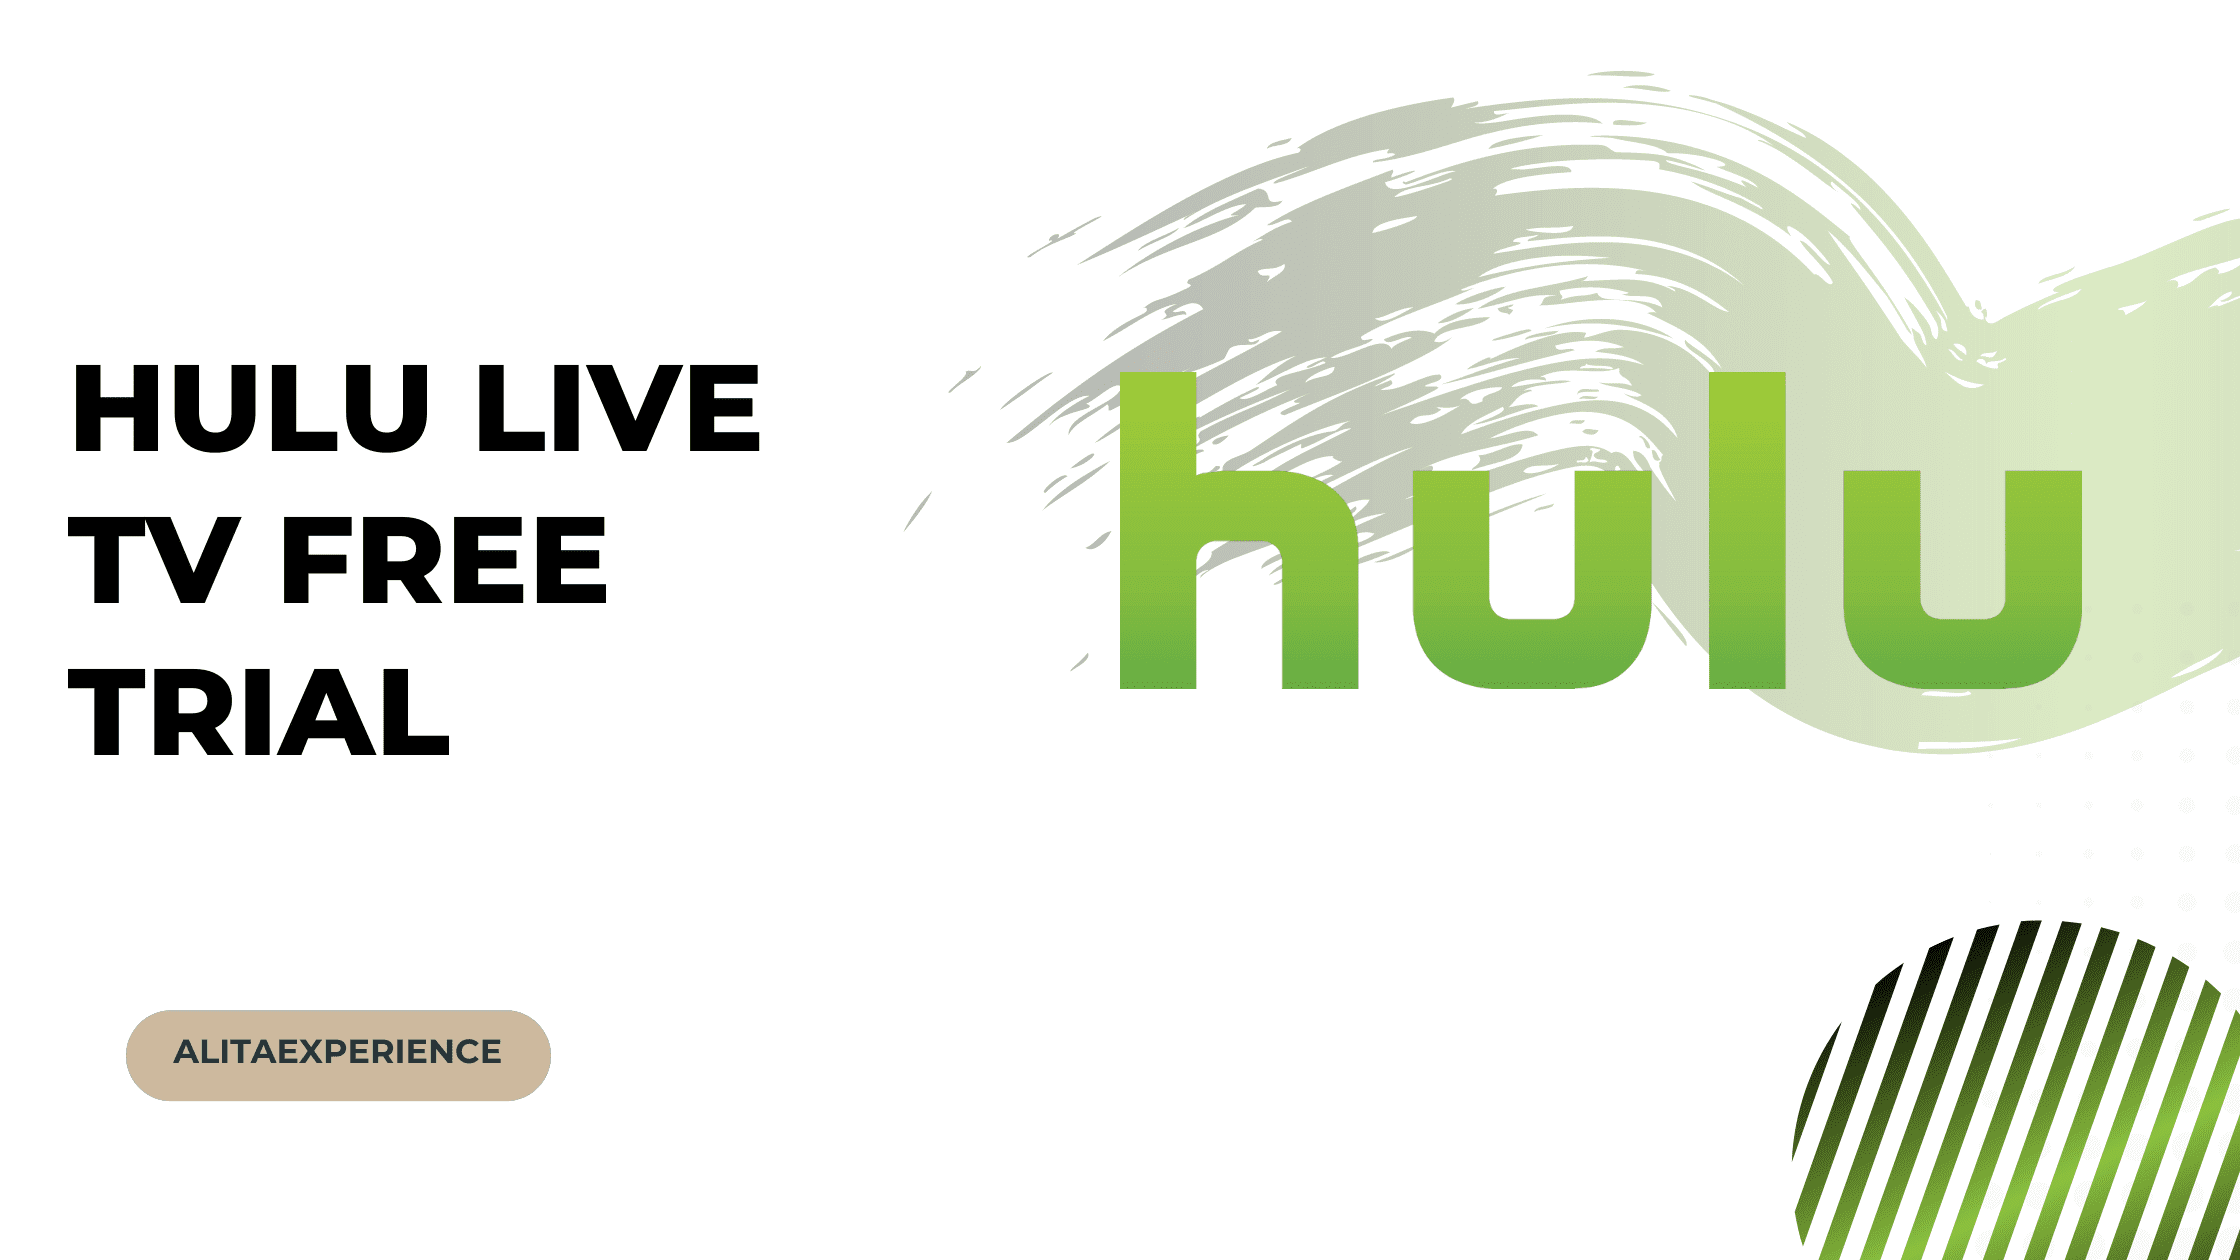 Hulu Live Tv Free Trial Is It Available? (2023 Update)